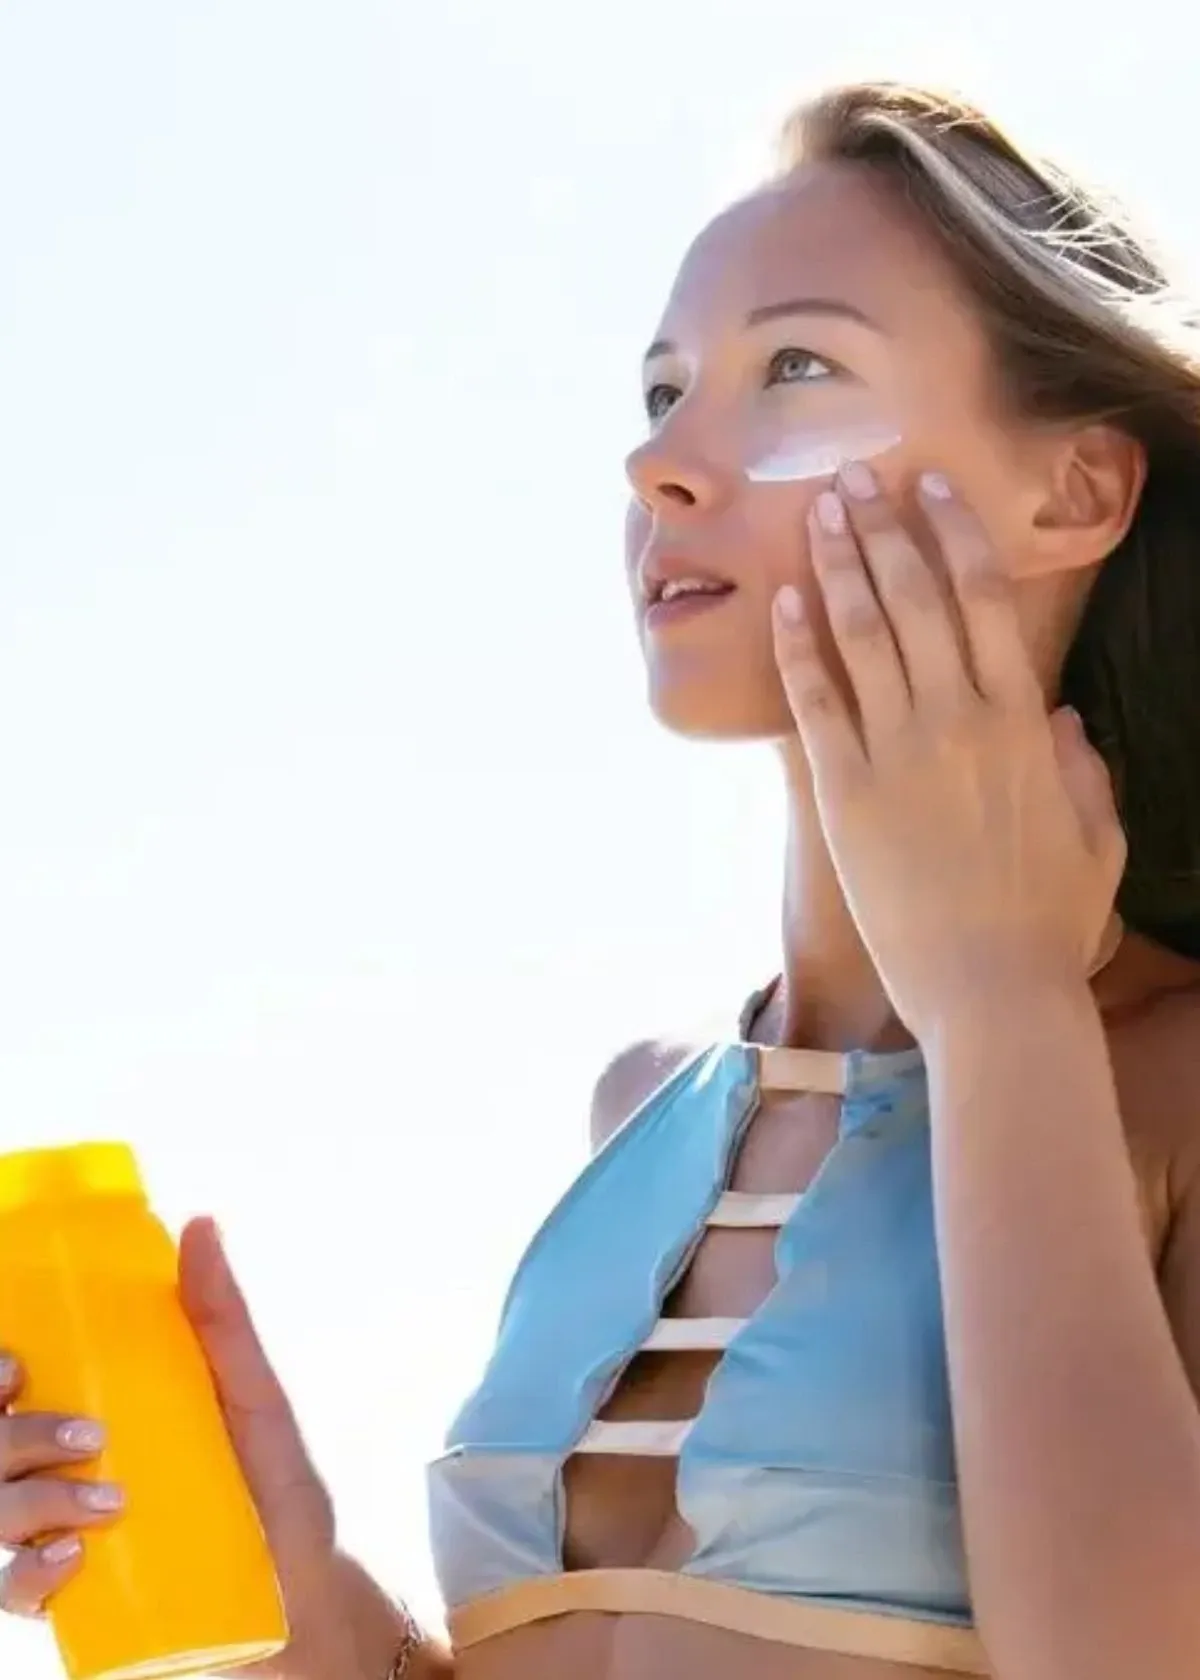 2023 Best SPF For Tanning | Our Top 3 Picks